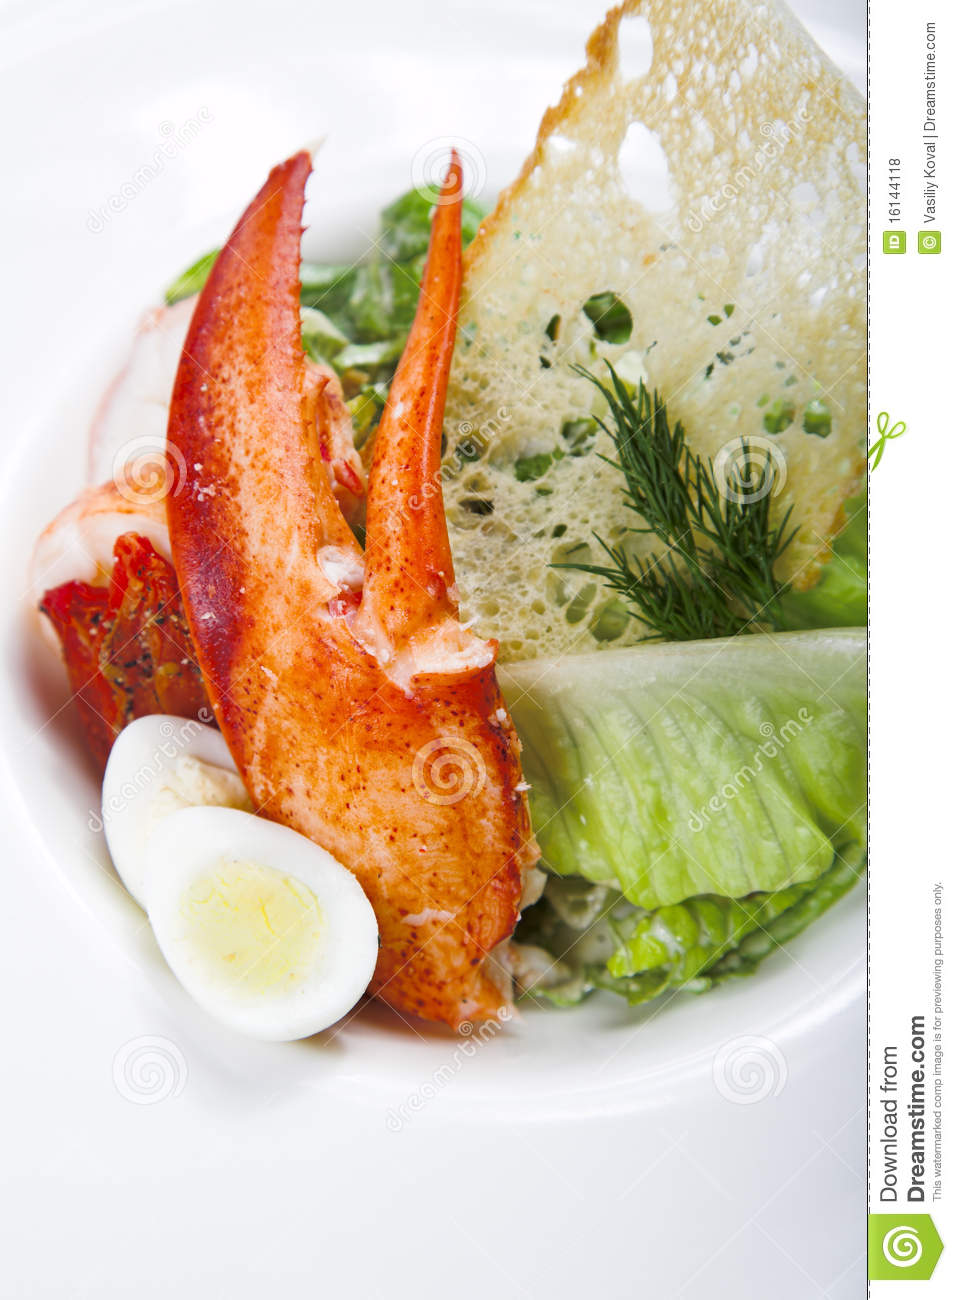 Crab Claw Royalty Free Stock Photos   Image  16144118